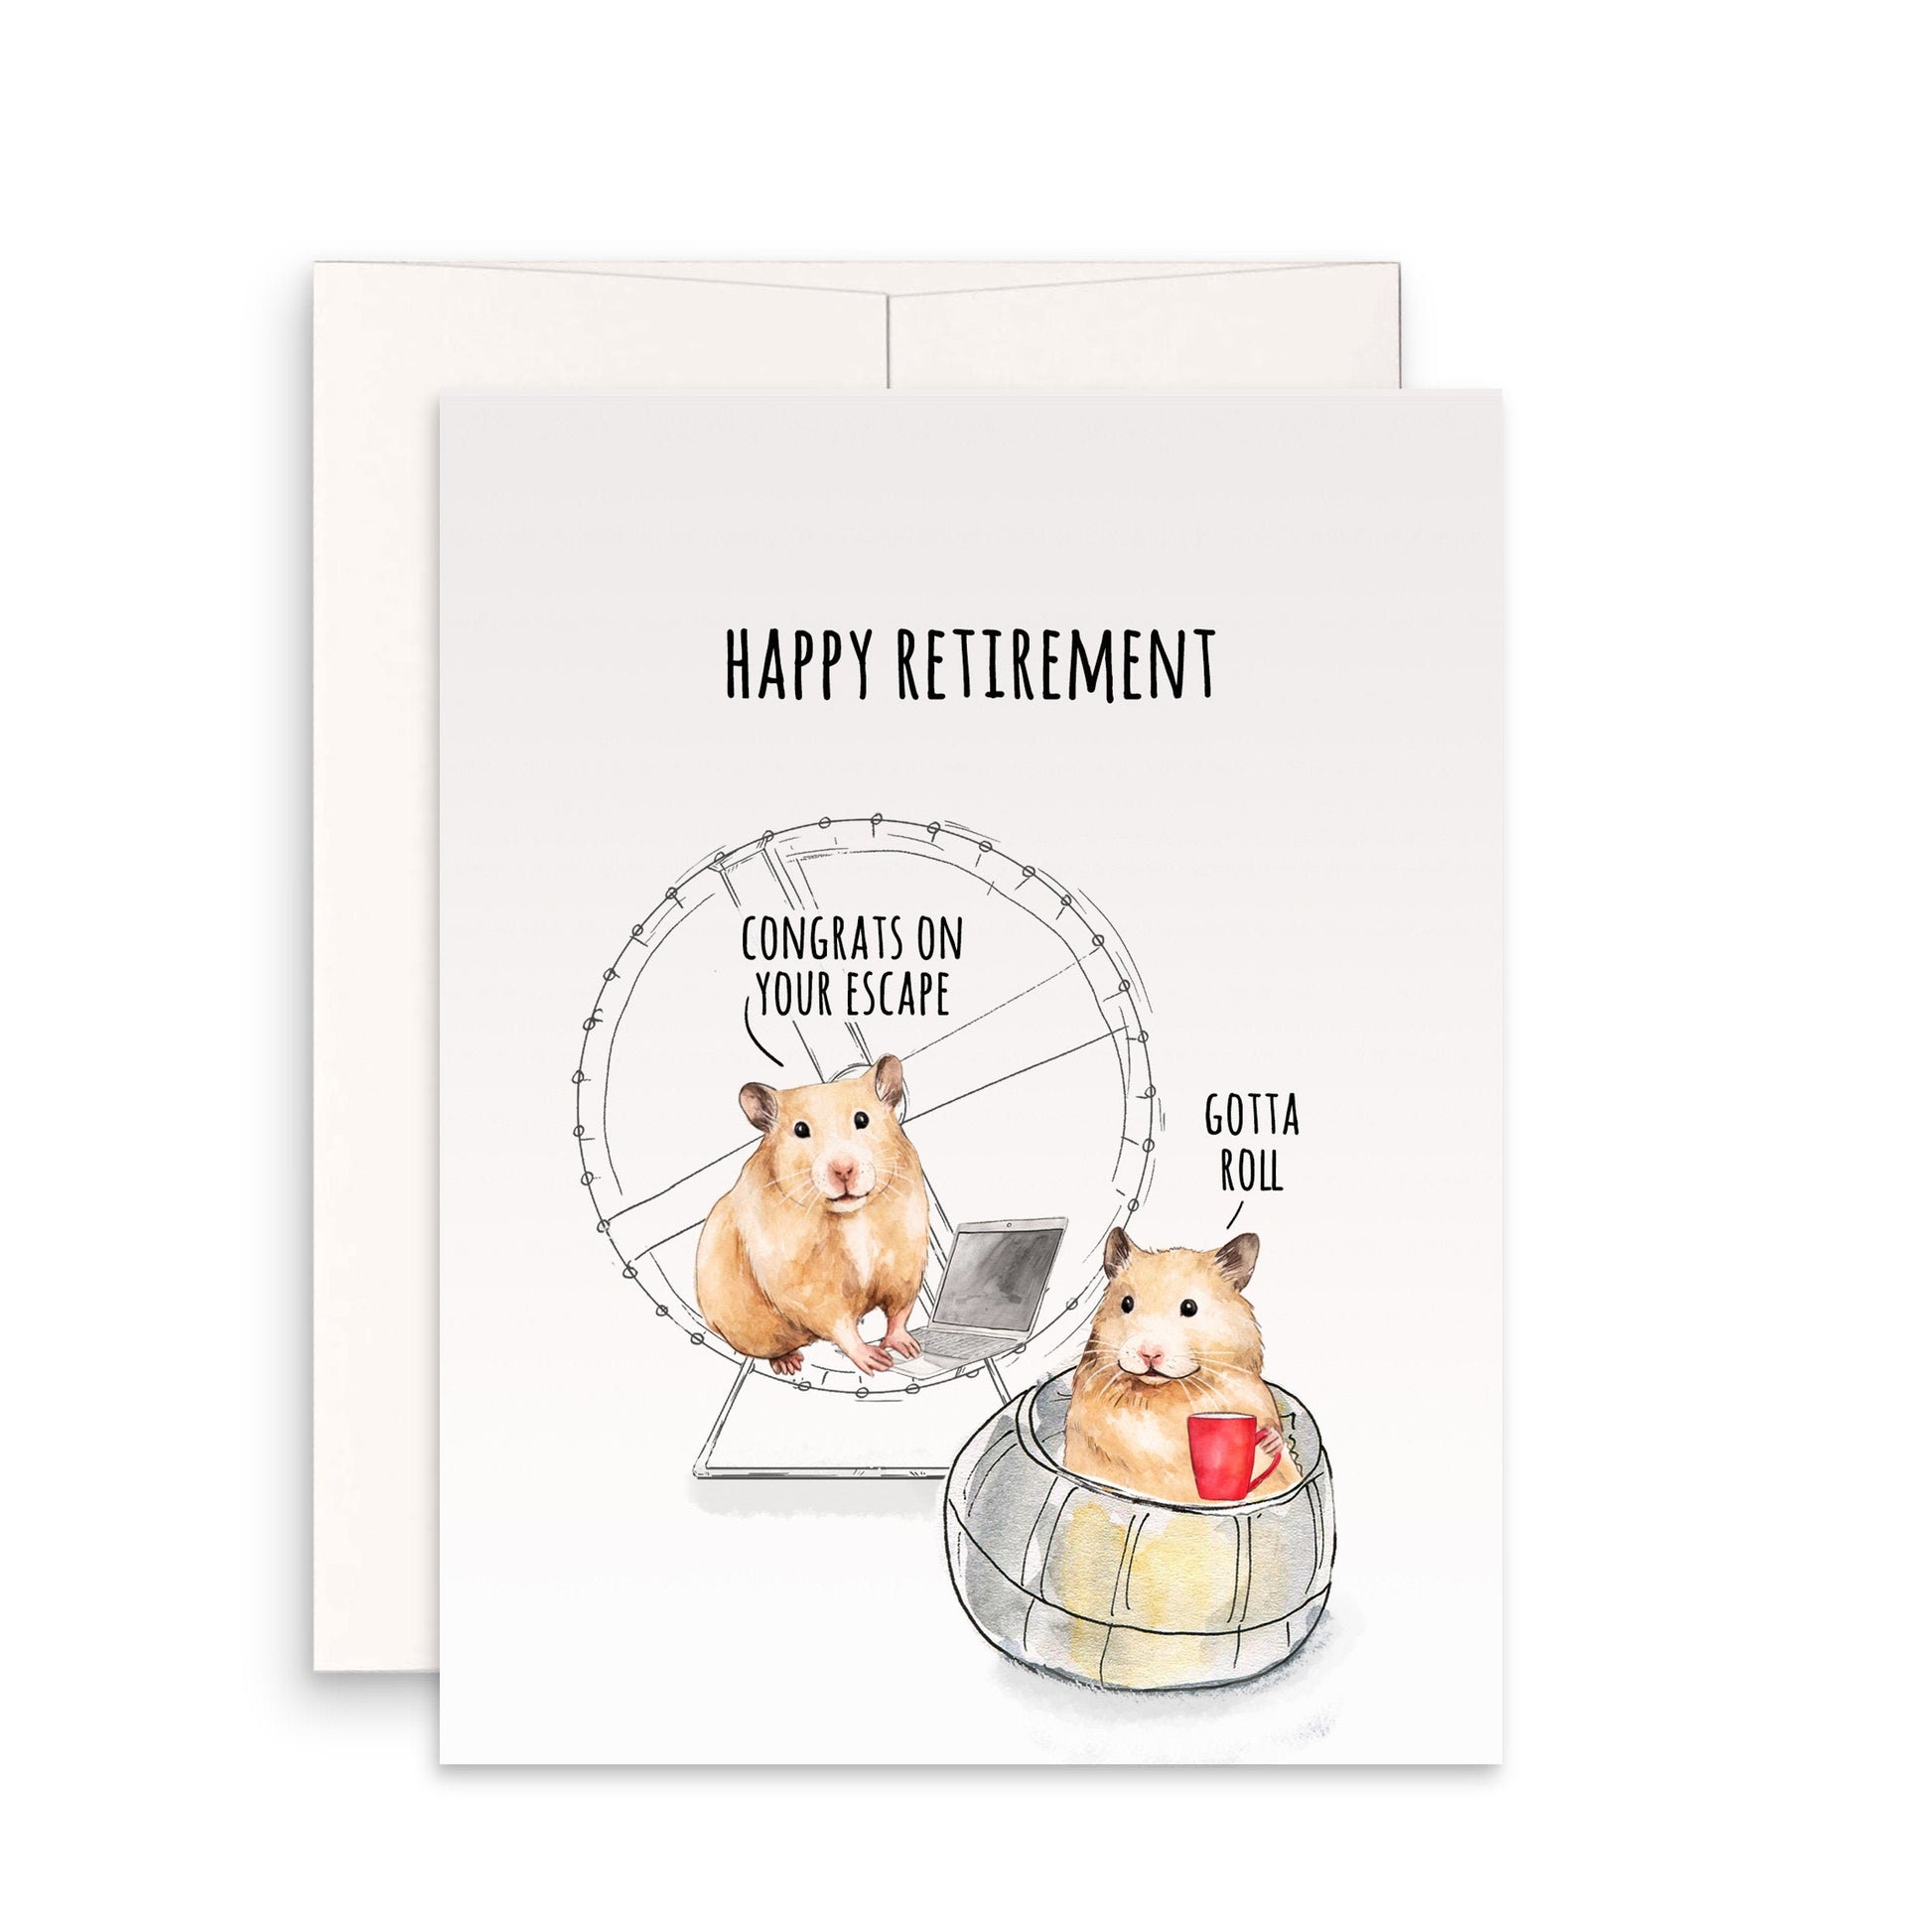 Hamster Happy Retirement Card - Coworker Leaving Farewell Cards - Congrats On Your Escape